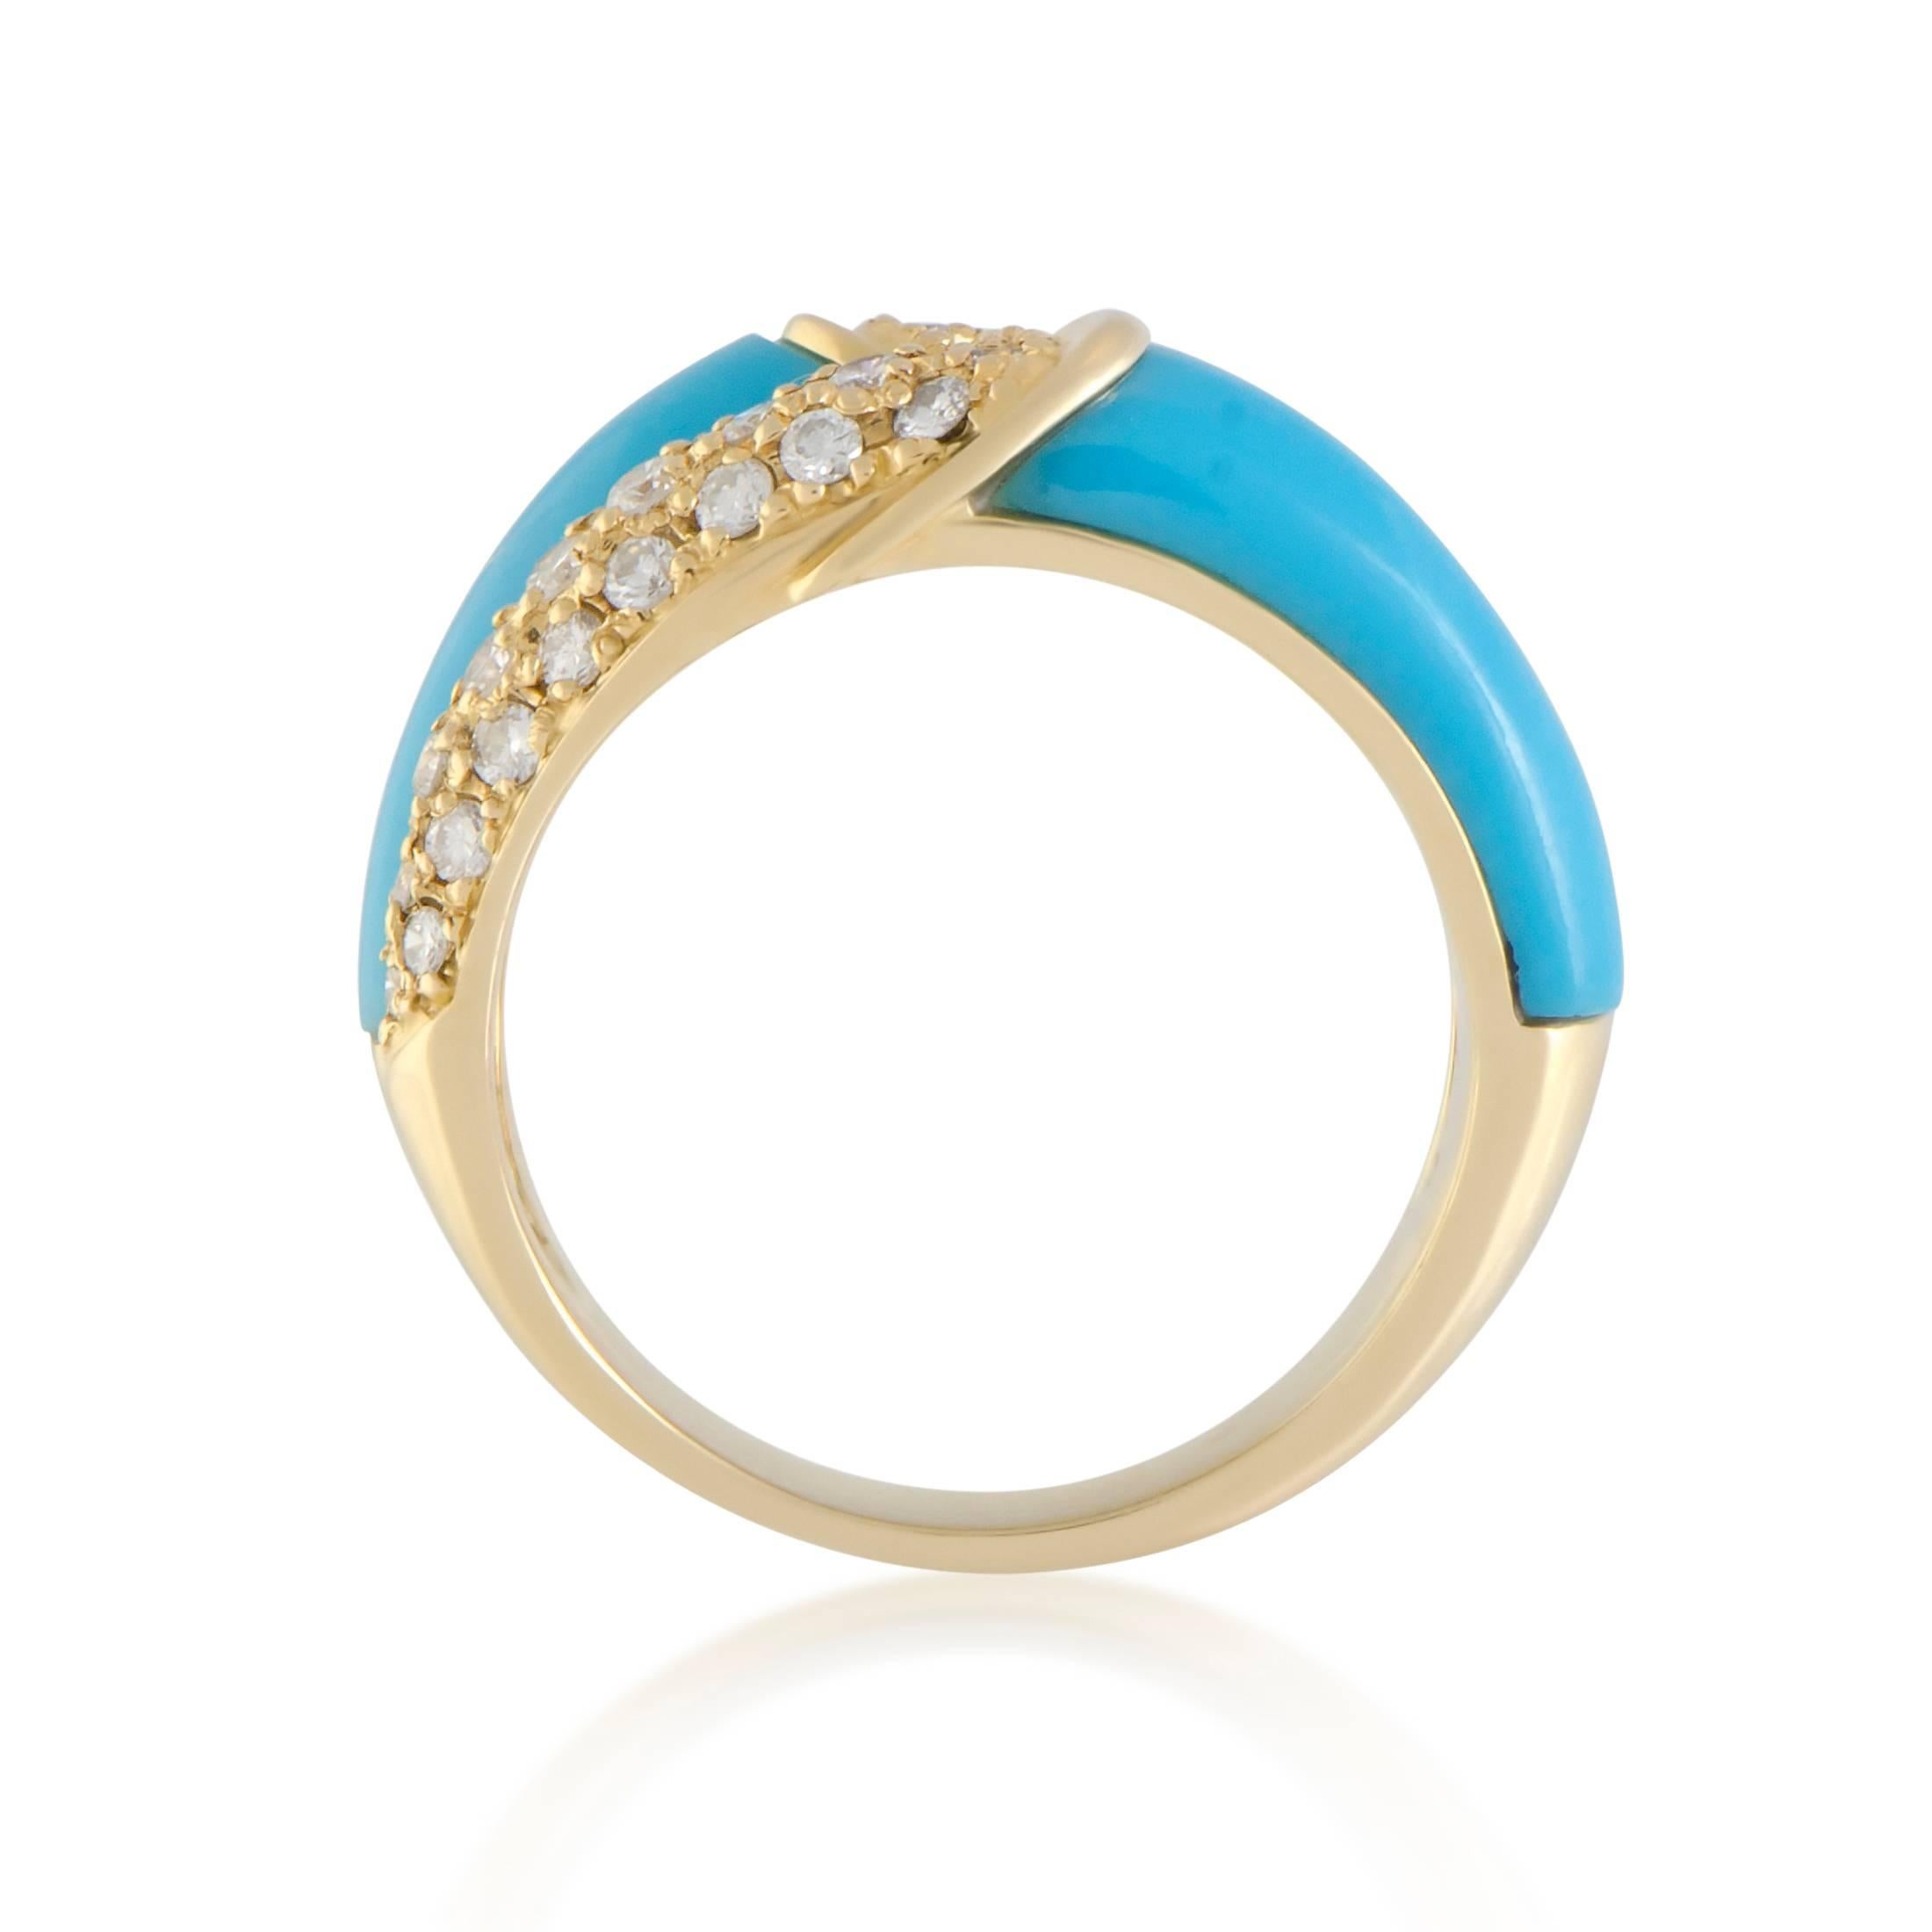 Brilliantly countering the adorable pastel nuance of the splendid turquoise with its gracefully glamorous blend of radiant 18K yellow gold and lustrous diamonds weighing in total 0.70 carats, this stunning ring exudes femininity and fine taste.
Band